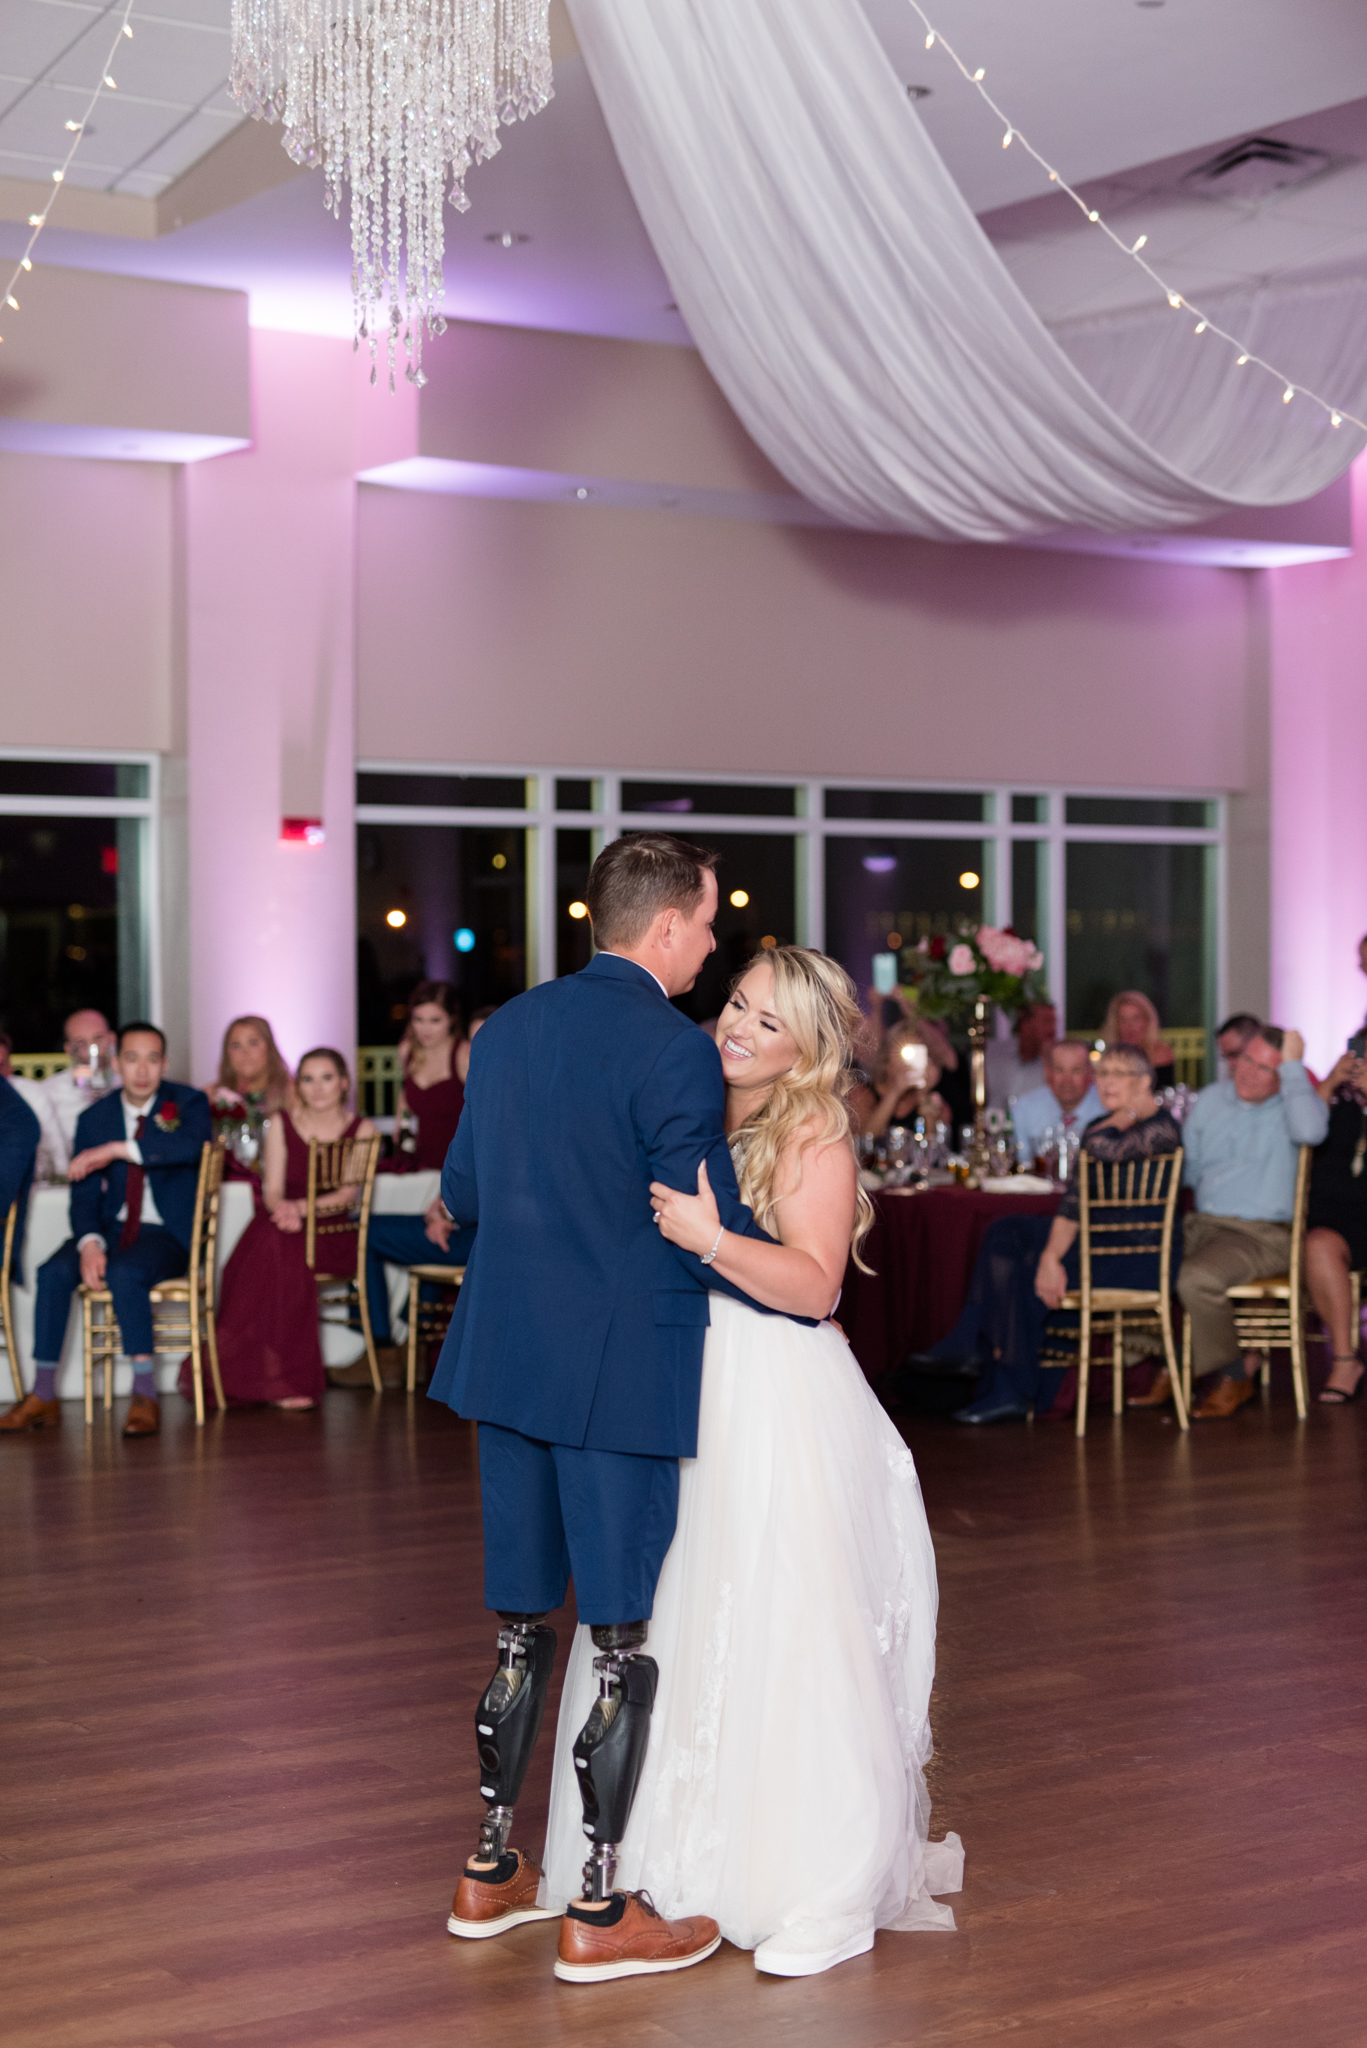 Bride and groom dance at reception.